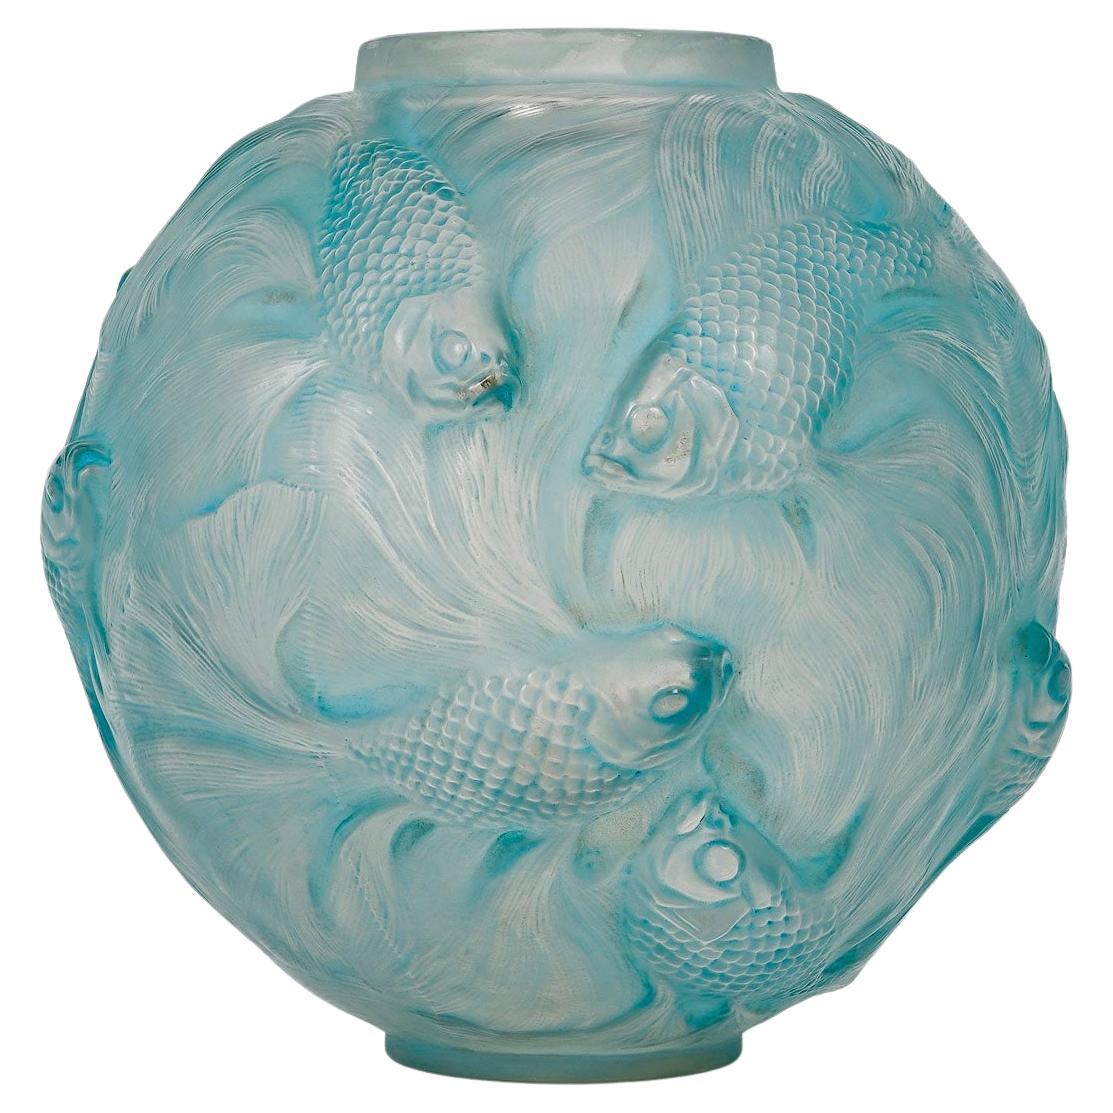 1924 René Lalique Vase Formose Frosted Glass Blue Patina, Fishes